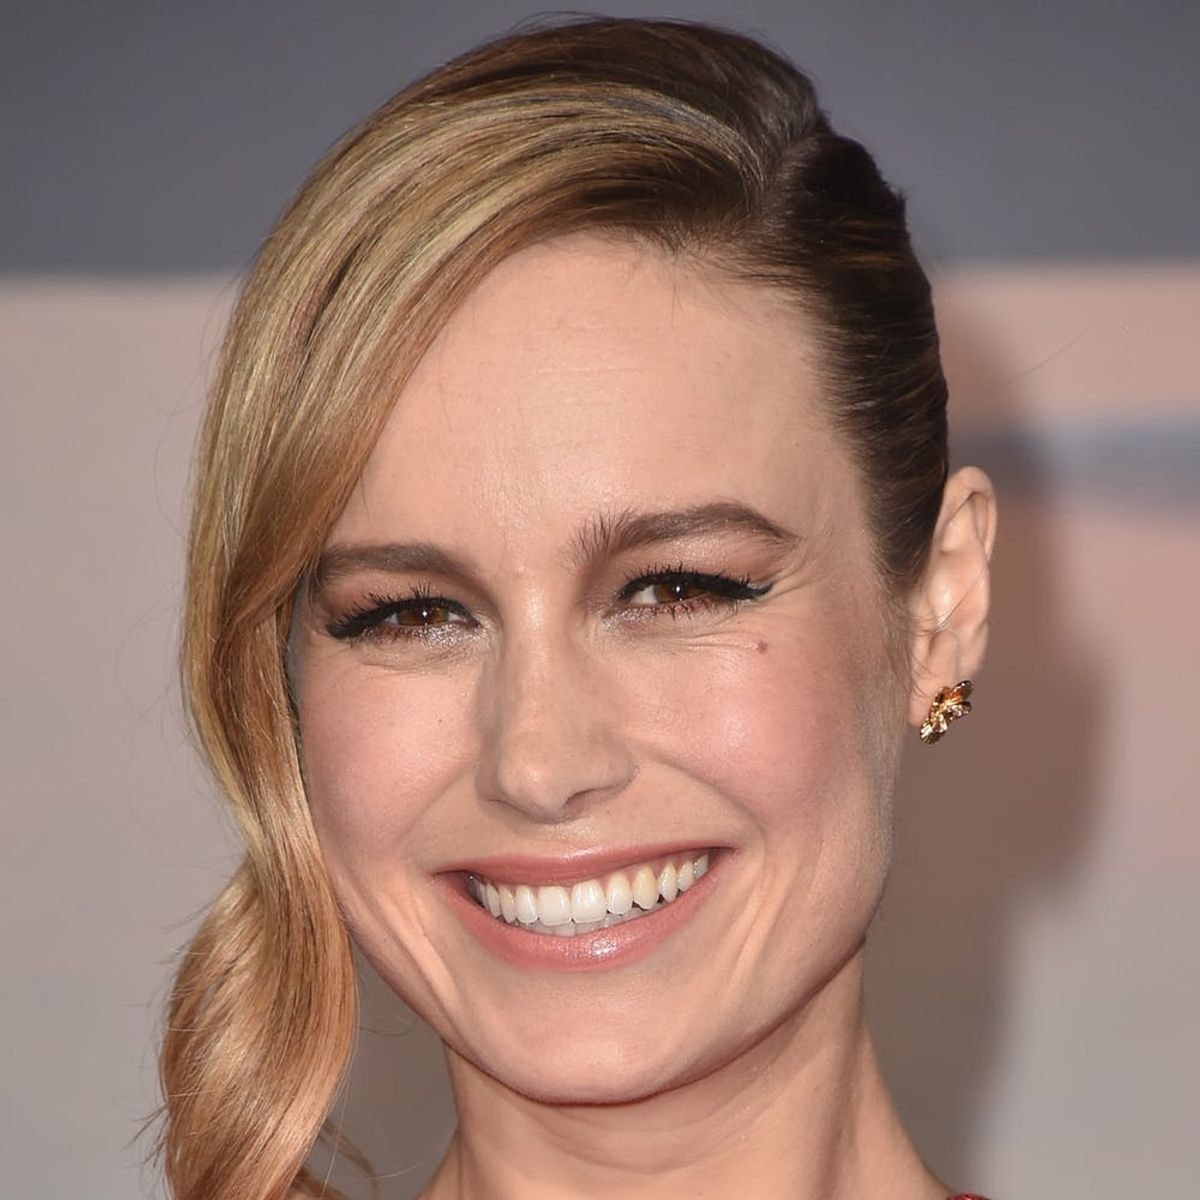 Brie Larson Just Sparked This Totally Inspiring Movement on Twitter